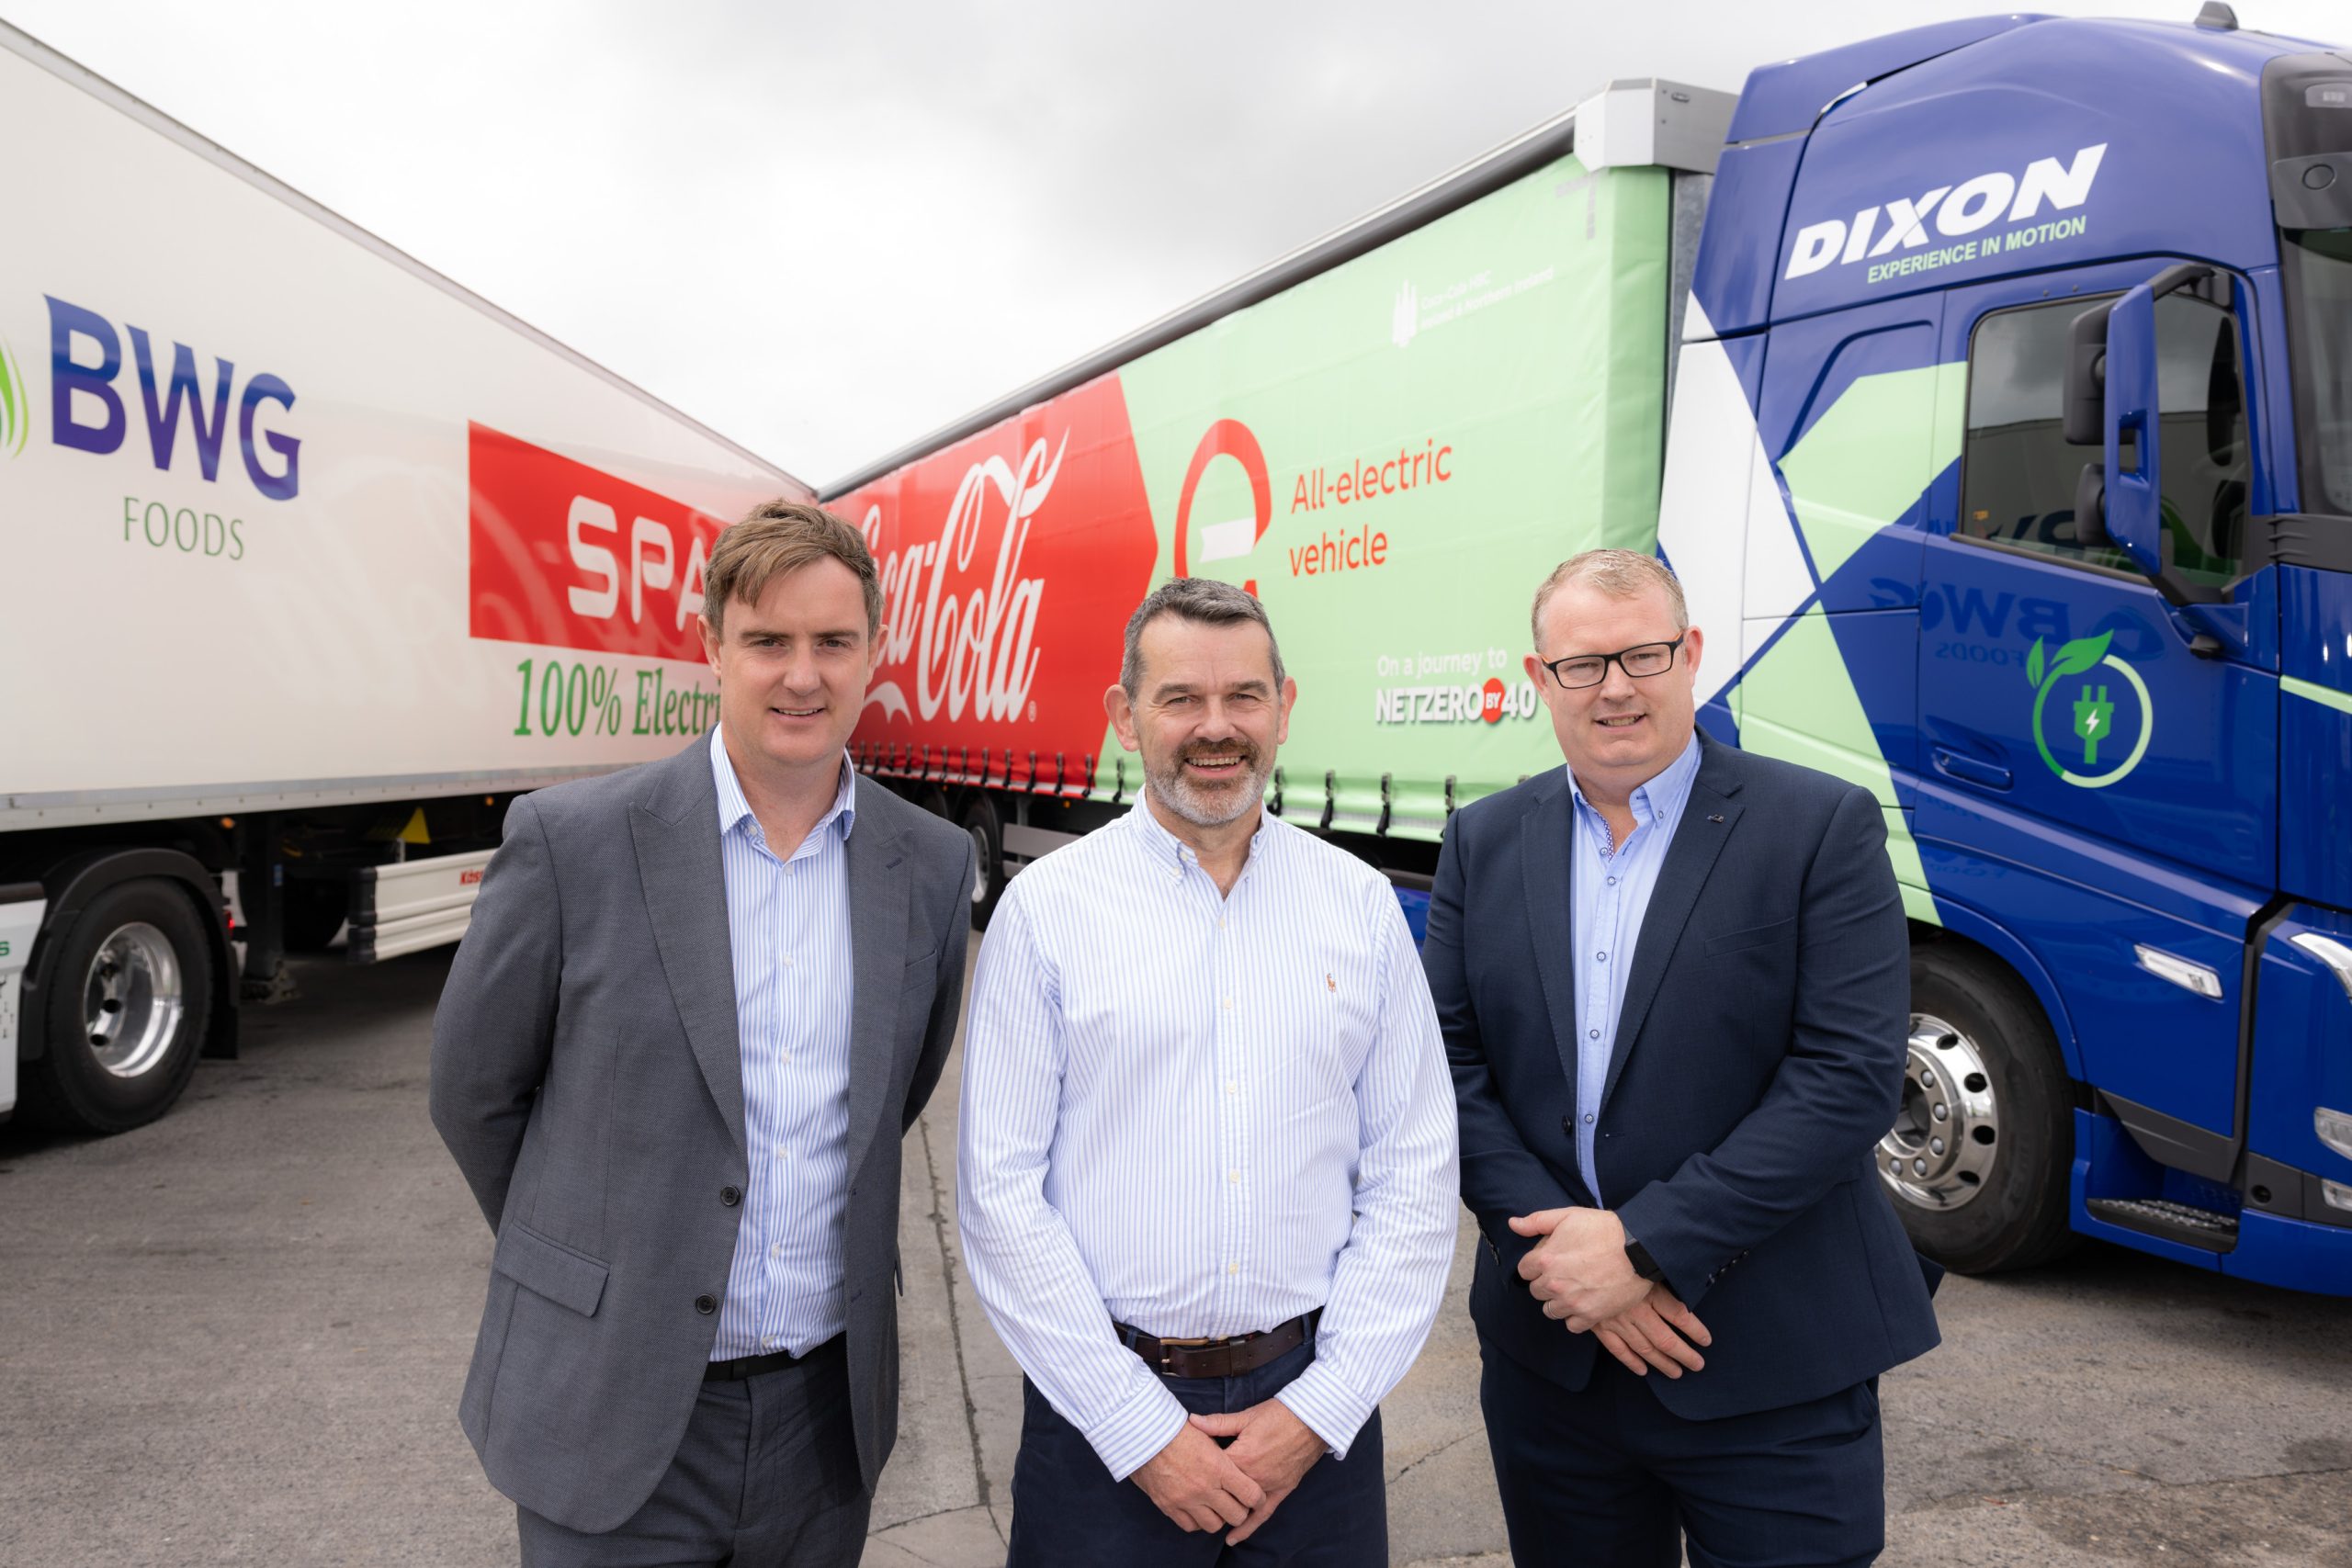 Coca-Cola HBC, BWG Foods and Dixon International Transport delivering a cleaner future